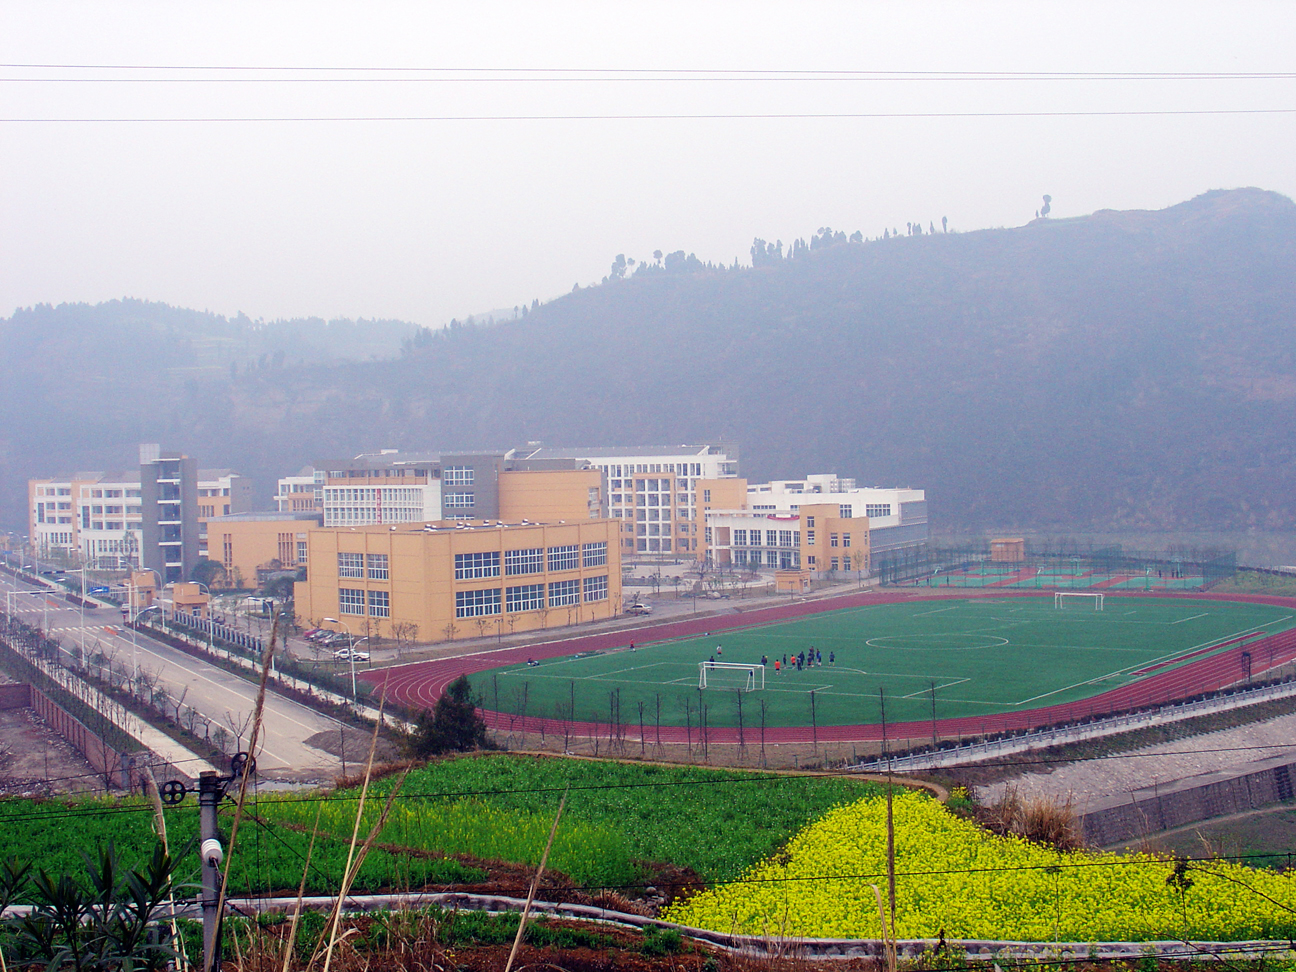 The school yard photographed from the hill